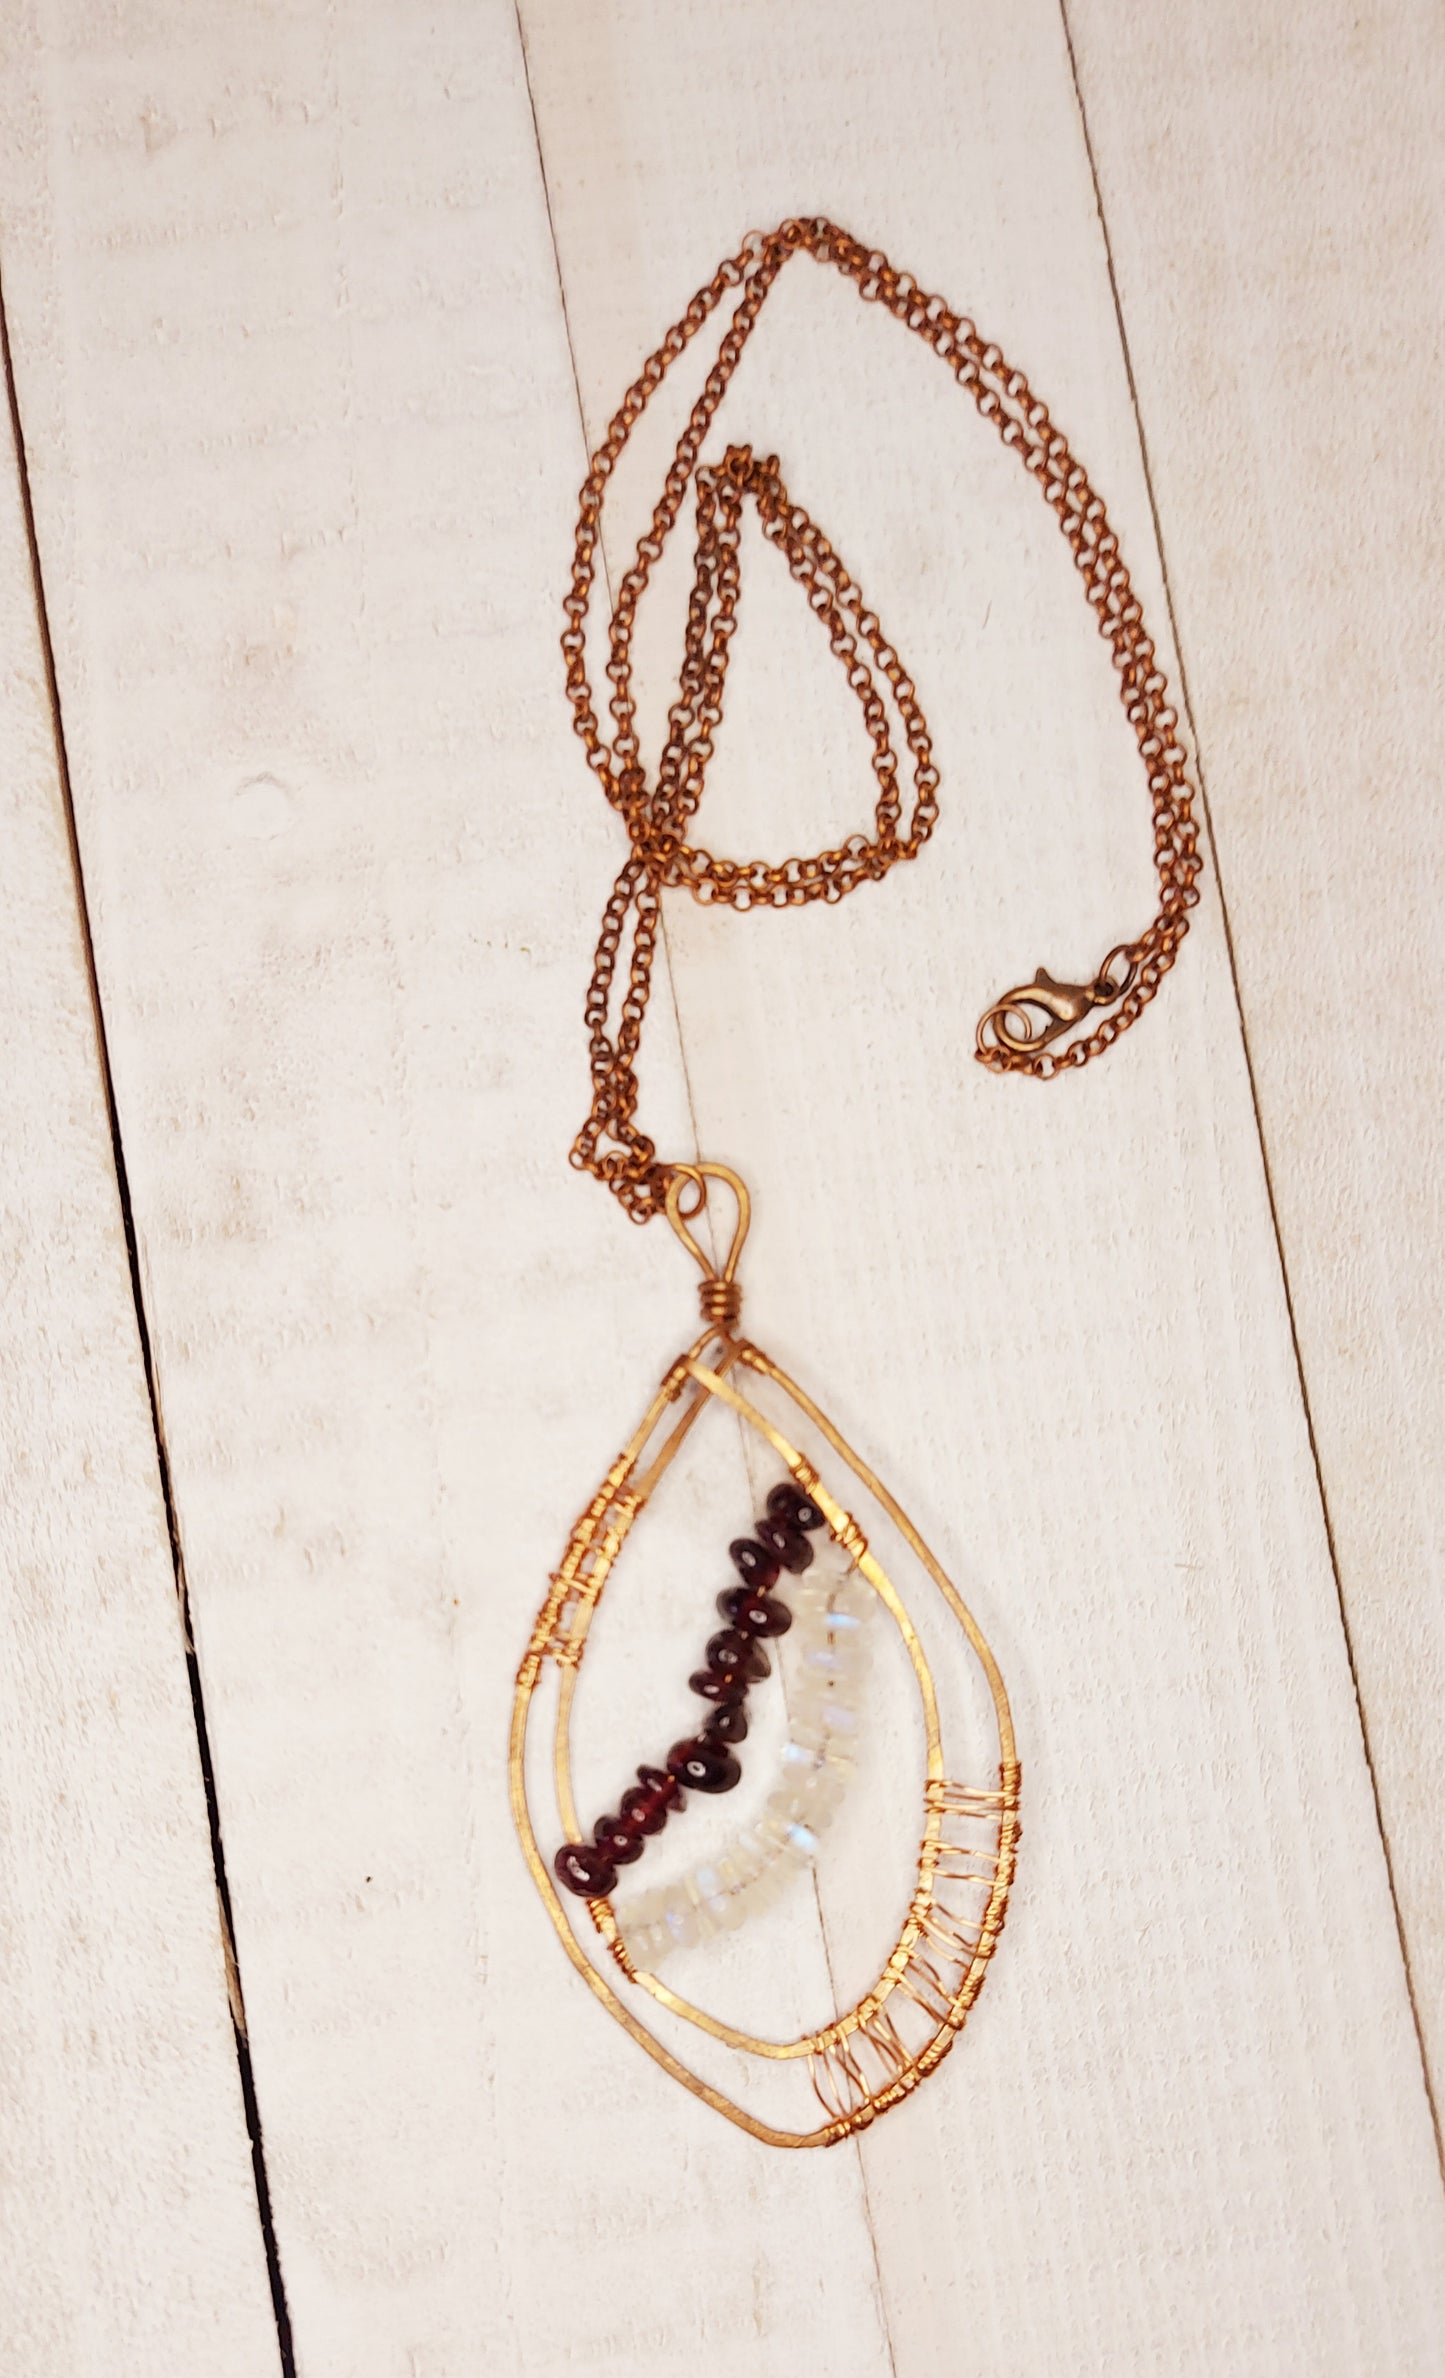 Rainbow Moonstone and Garnet Copper Necklace